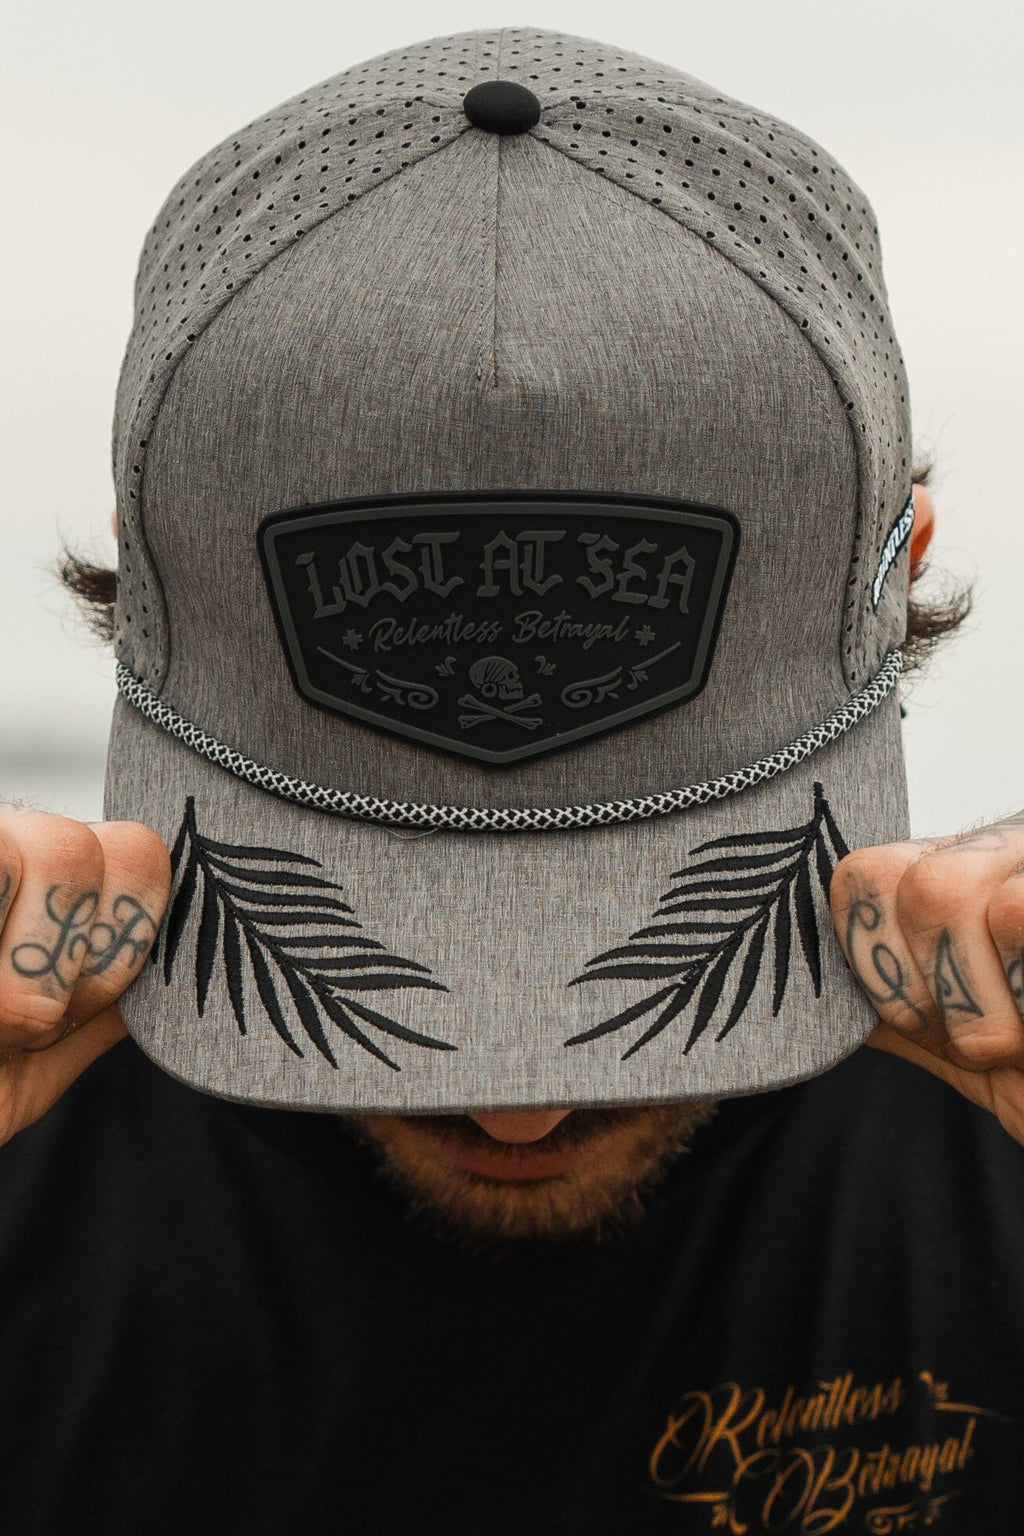 THE ALL NEW BLACK LOST AT SEA 3D PVC SNAPBACK 🔥SET YOUR ALARMS, TOMORROW,  8AM, EST., THE ALL NEW STANDFAST DROP GOES LIVE 🔥🔥🔥